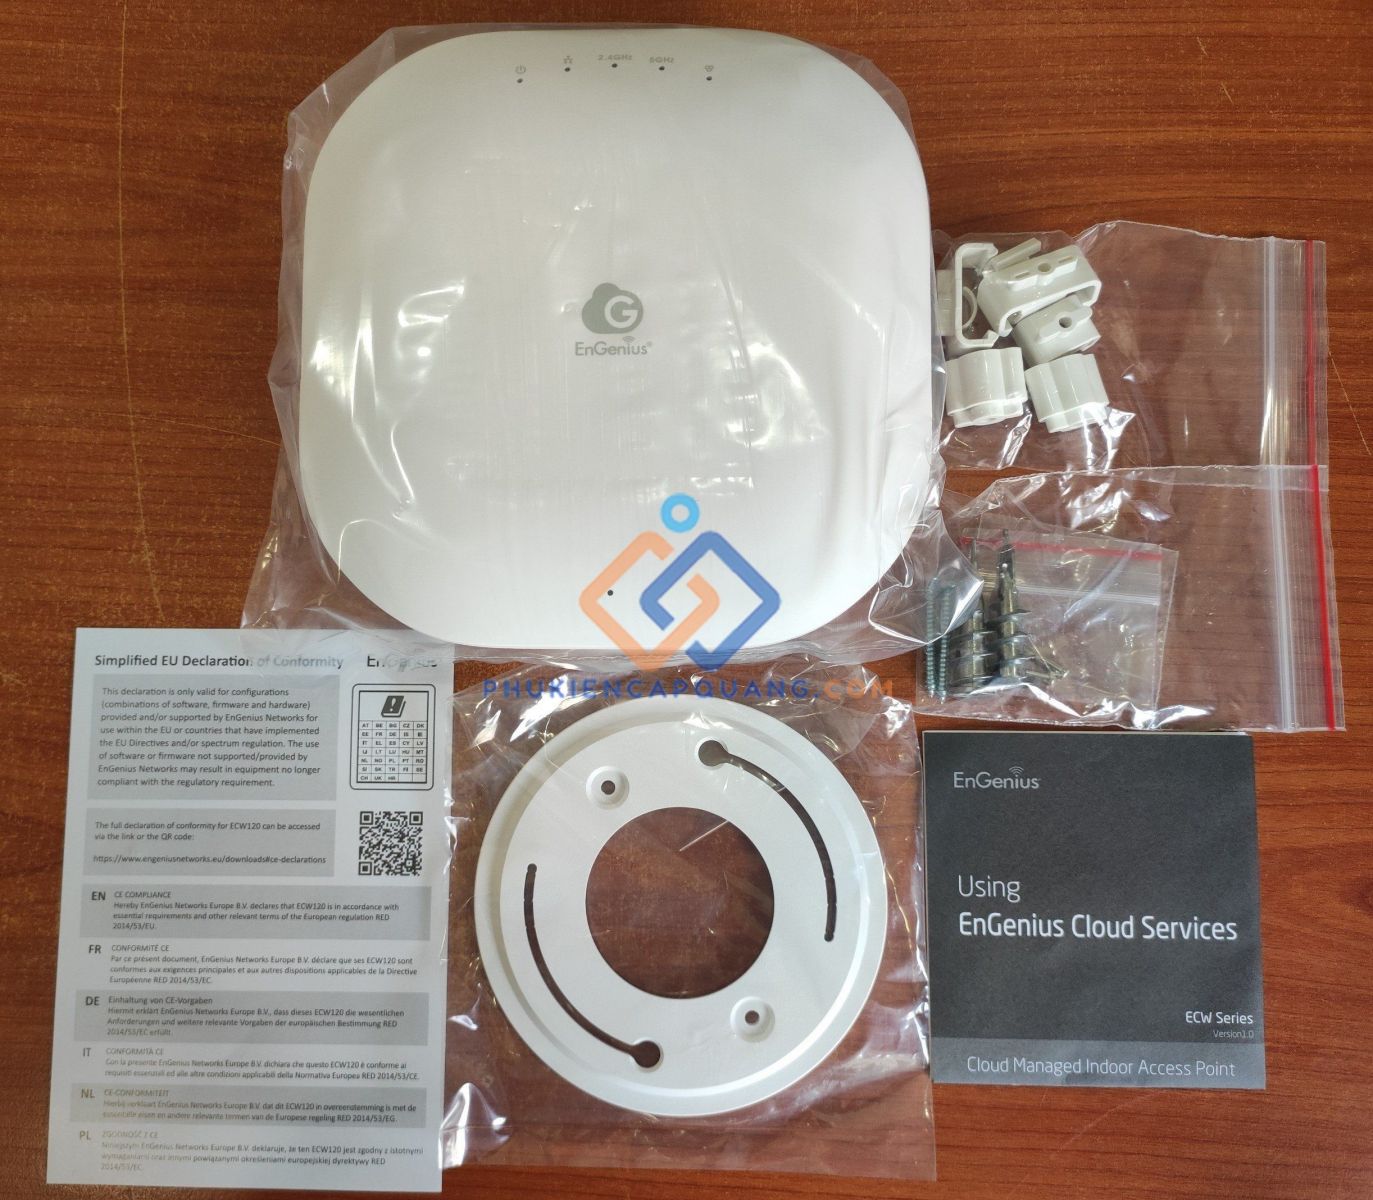 engenius-ecw120-cloud-managed-11ac-wave-2-wireless-indoor-access-poin-chinh-hang